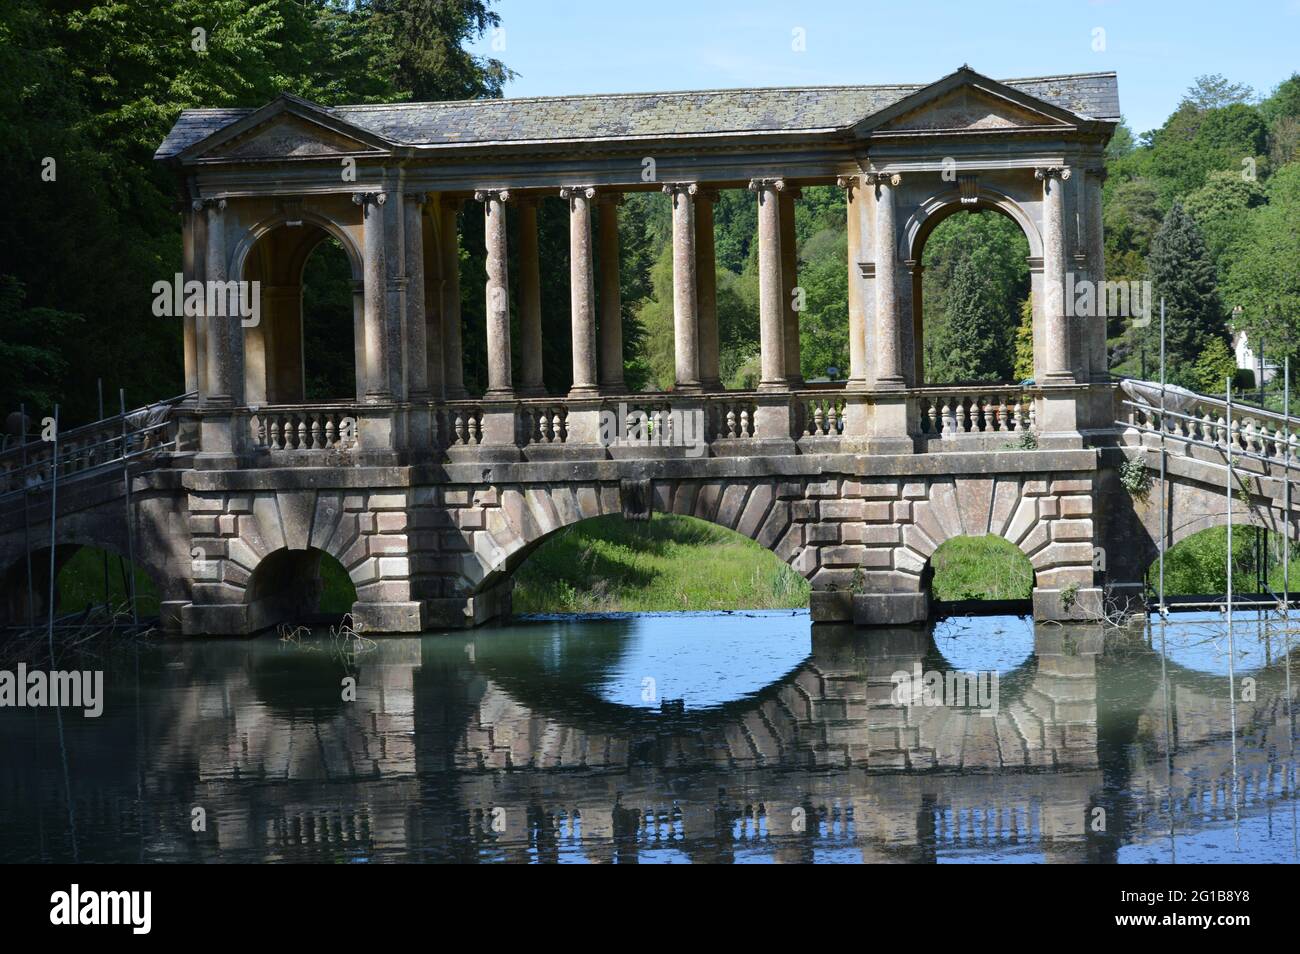 Bath, UK. 4 June 2021. On-going structural and engineering work carried out on the dams to restore The Palladian Bridge in Prior Park Landscape Garden. Stock Photo